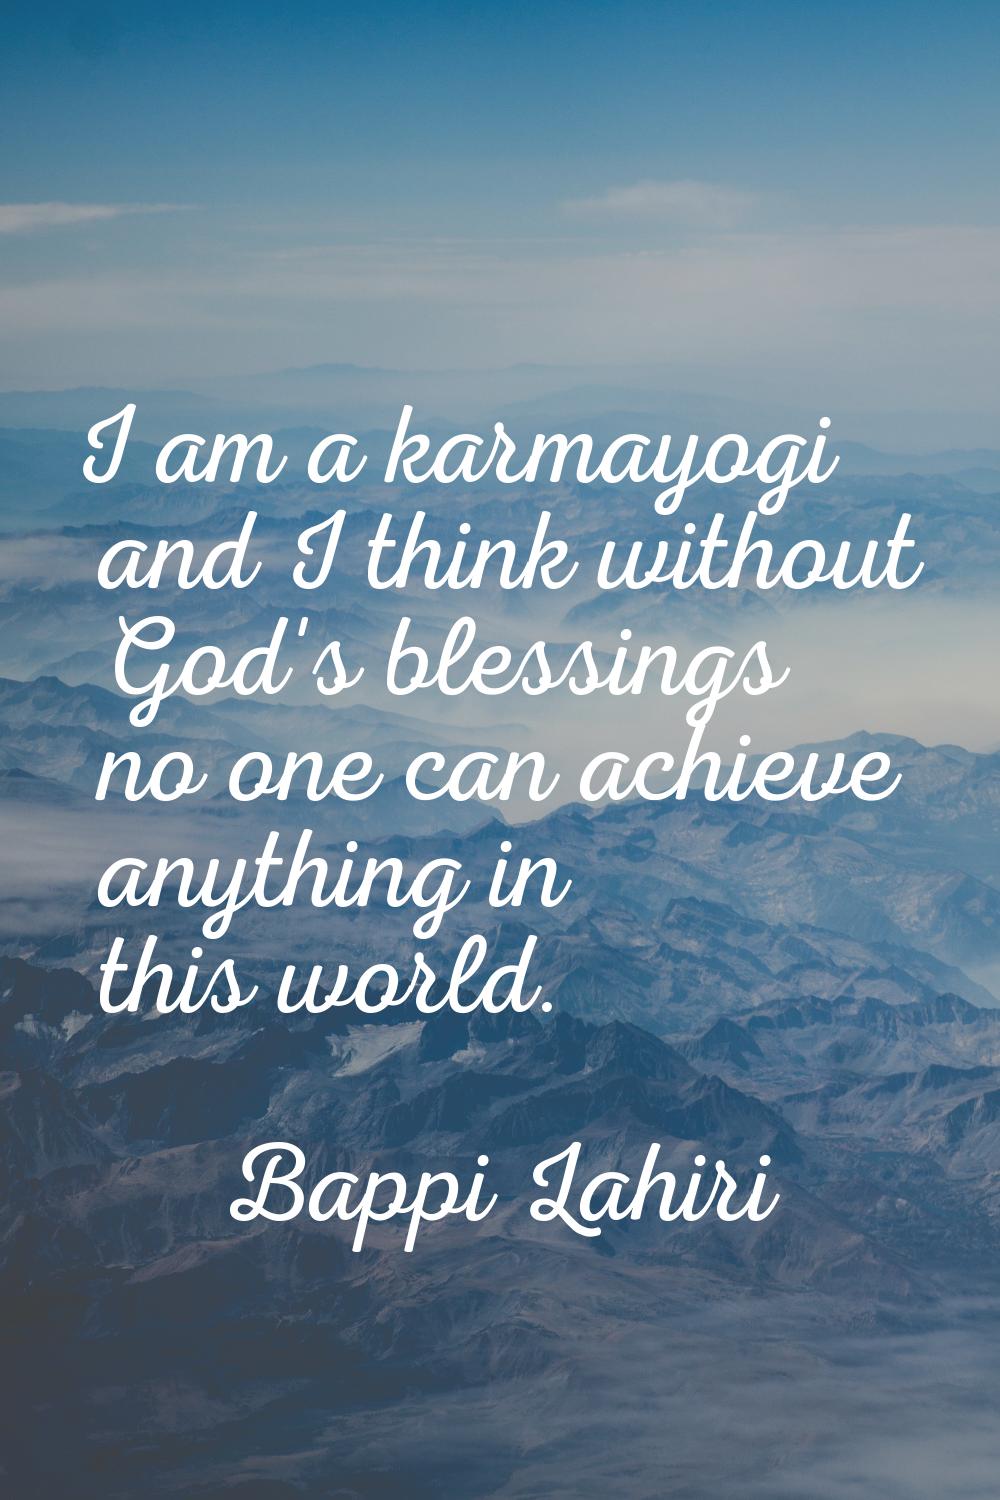 I am a karmayogi and I think without God's blessings no one can achieve anything in this world.